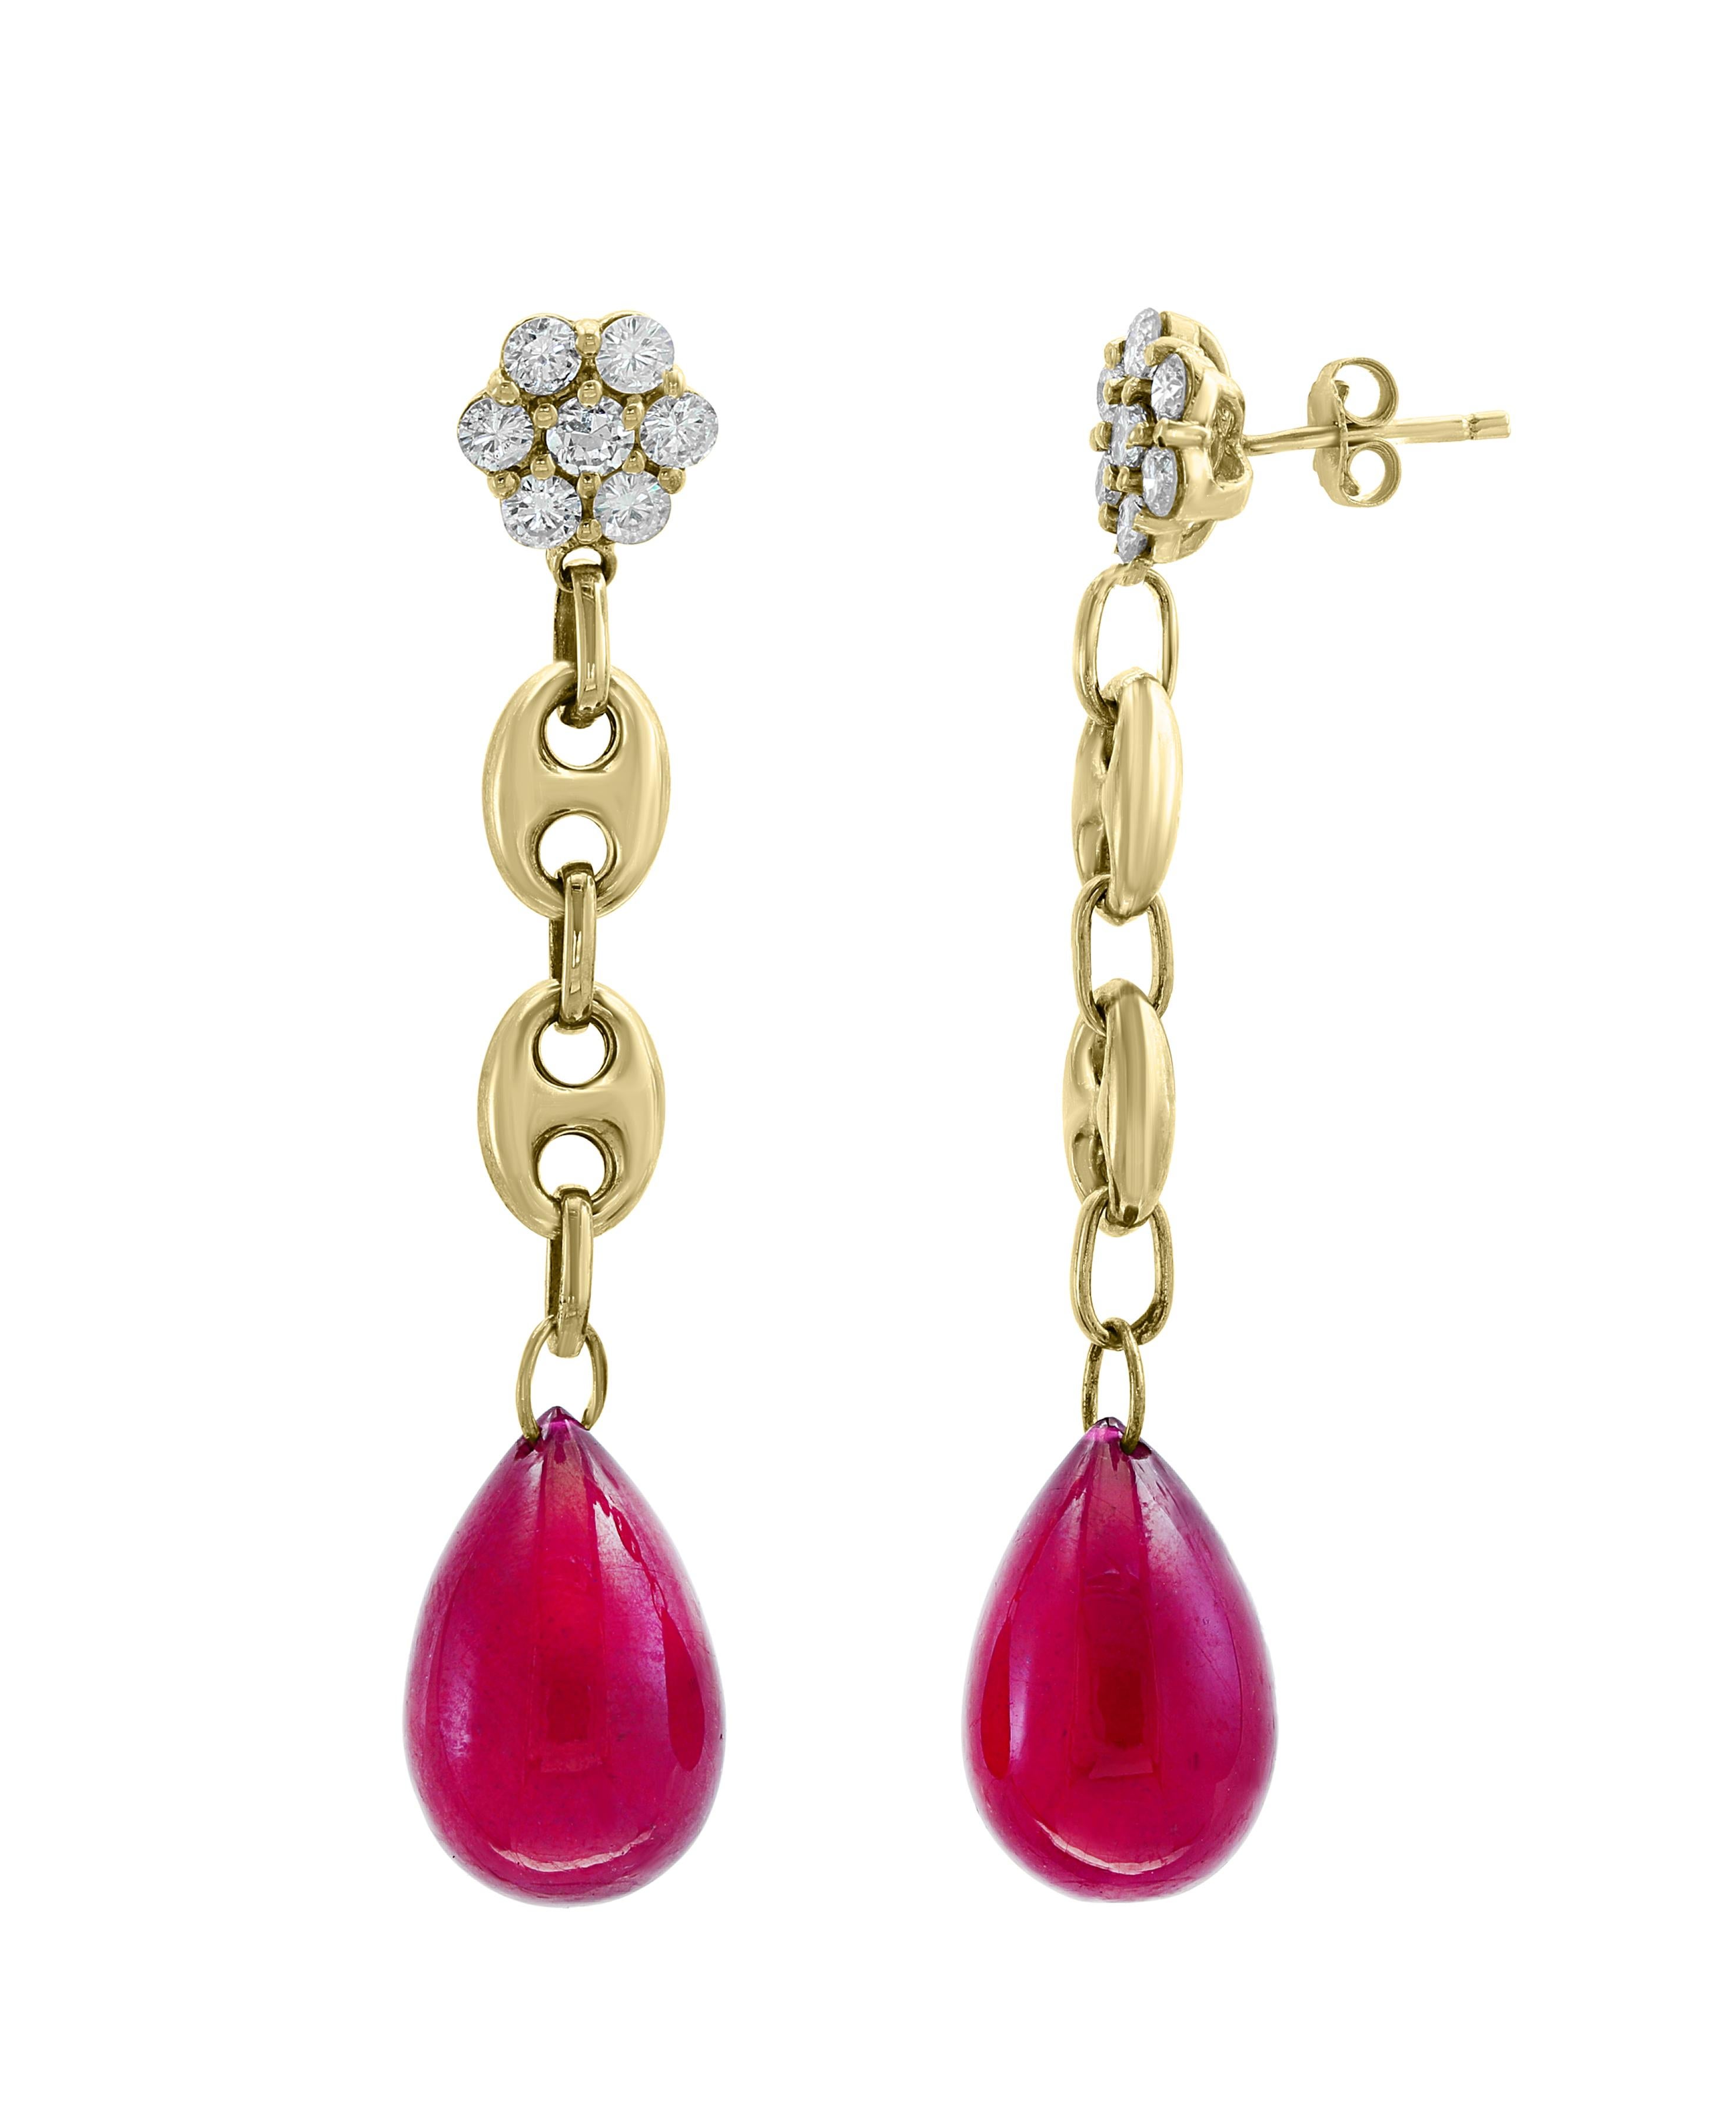 45 Carat Ruby Drop and Diamond Hanging/Chandelier Earrings 14 Karat Yellow Gold In Excellent Condition For Sale In New York, NY